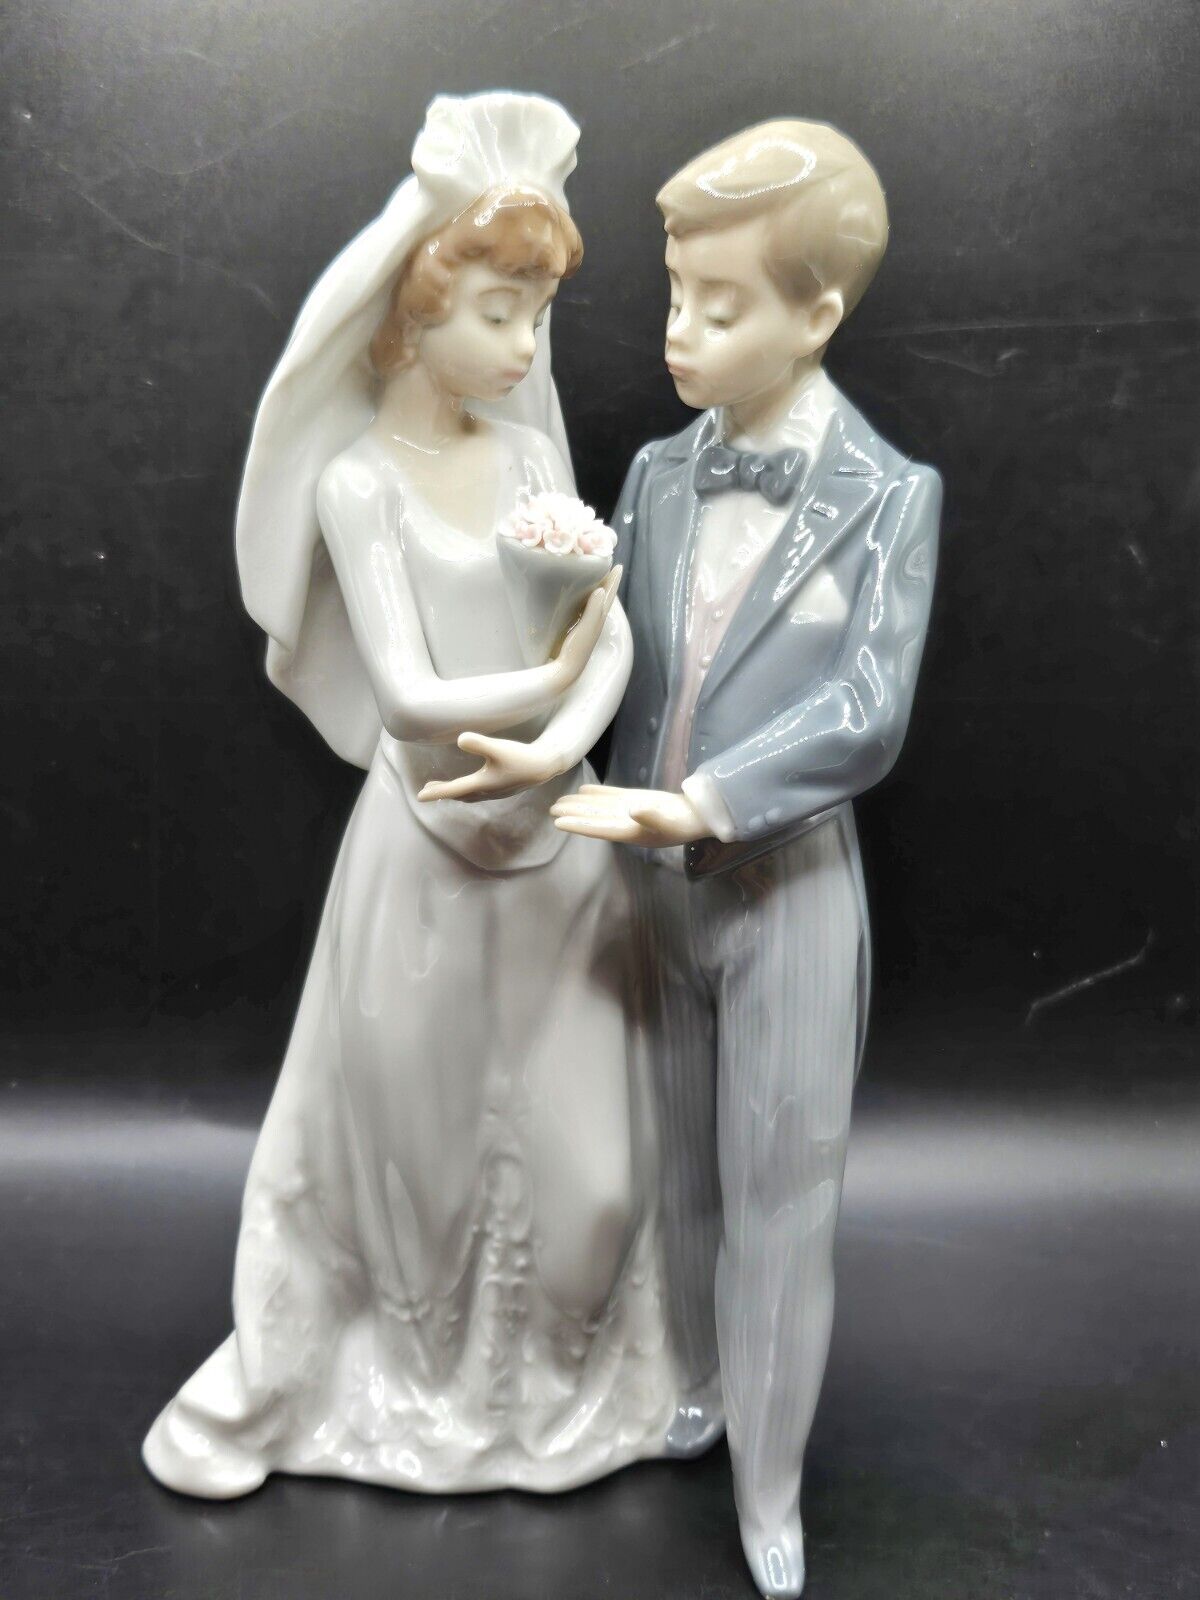 1991 LLADRO #5885 “FROM THIS DAY FORWARD” WEDDING BRIDE & GROOM RETIRED